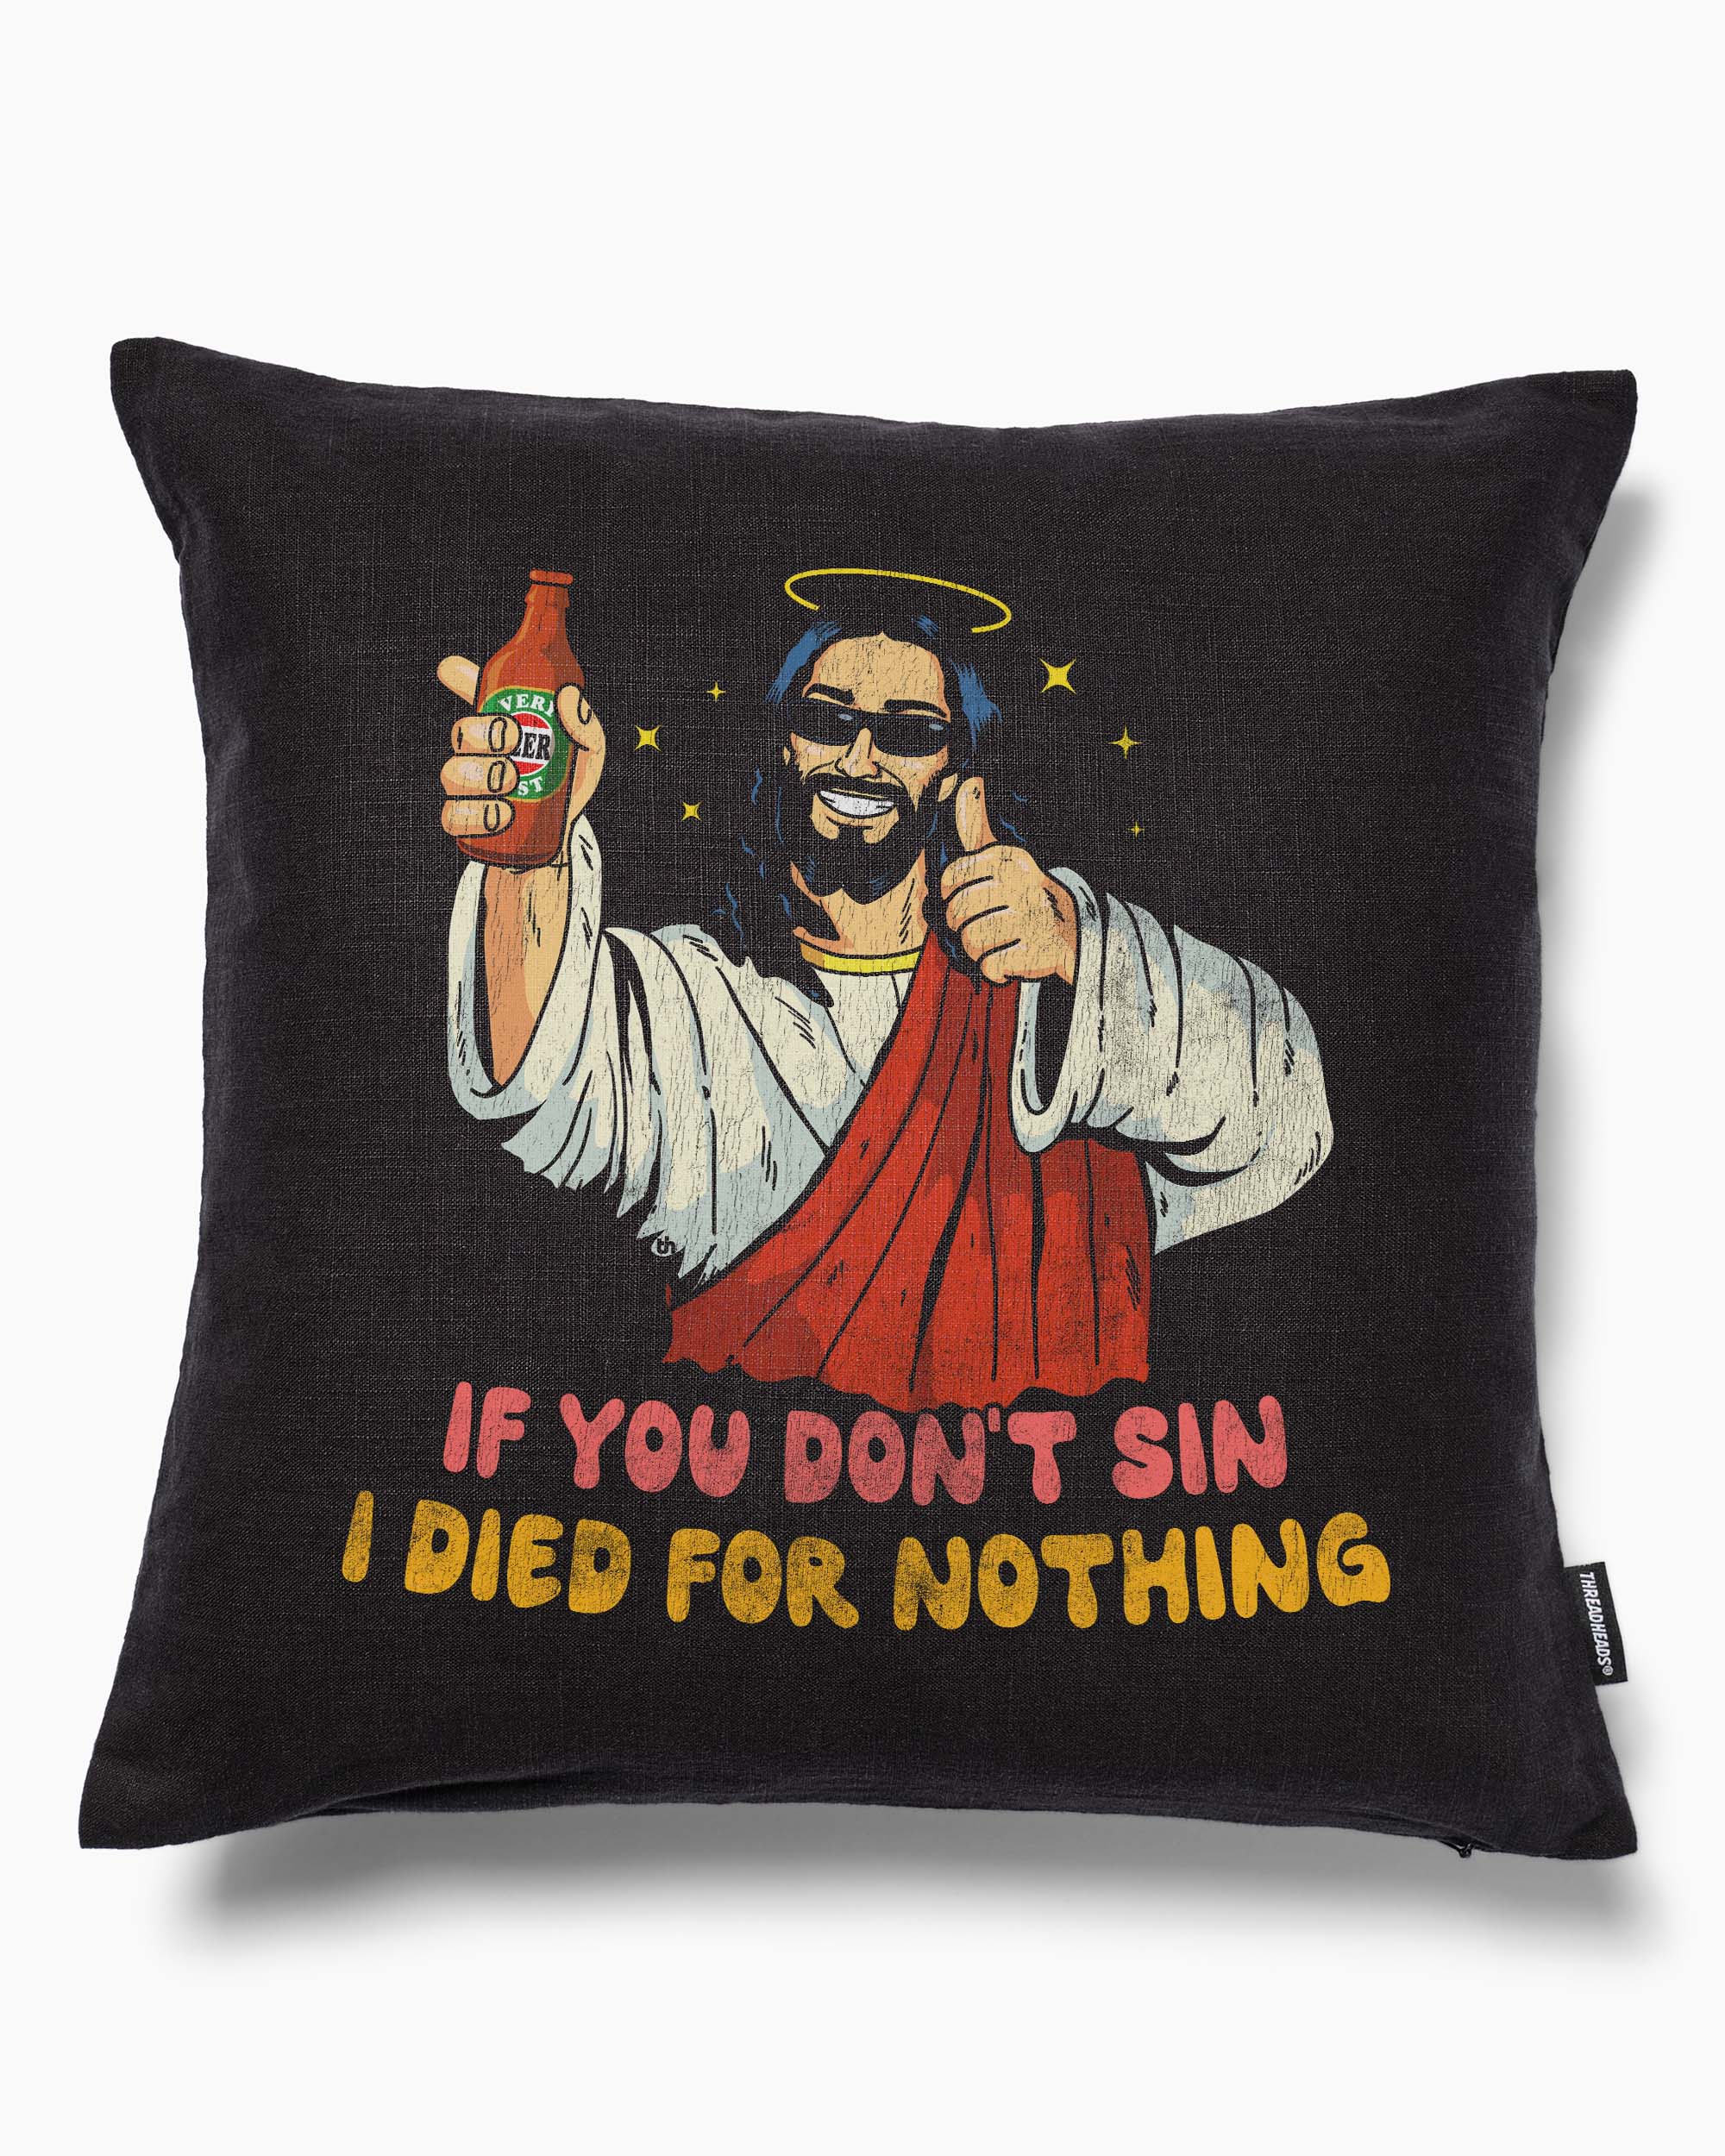 If You Don't Sin I Died for Nothing Cushion